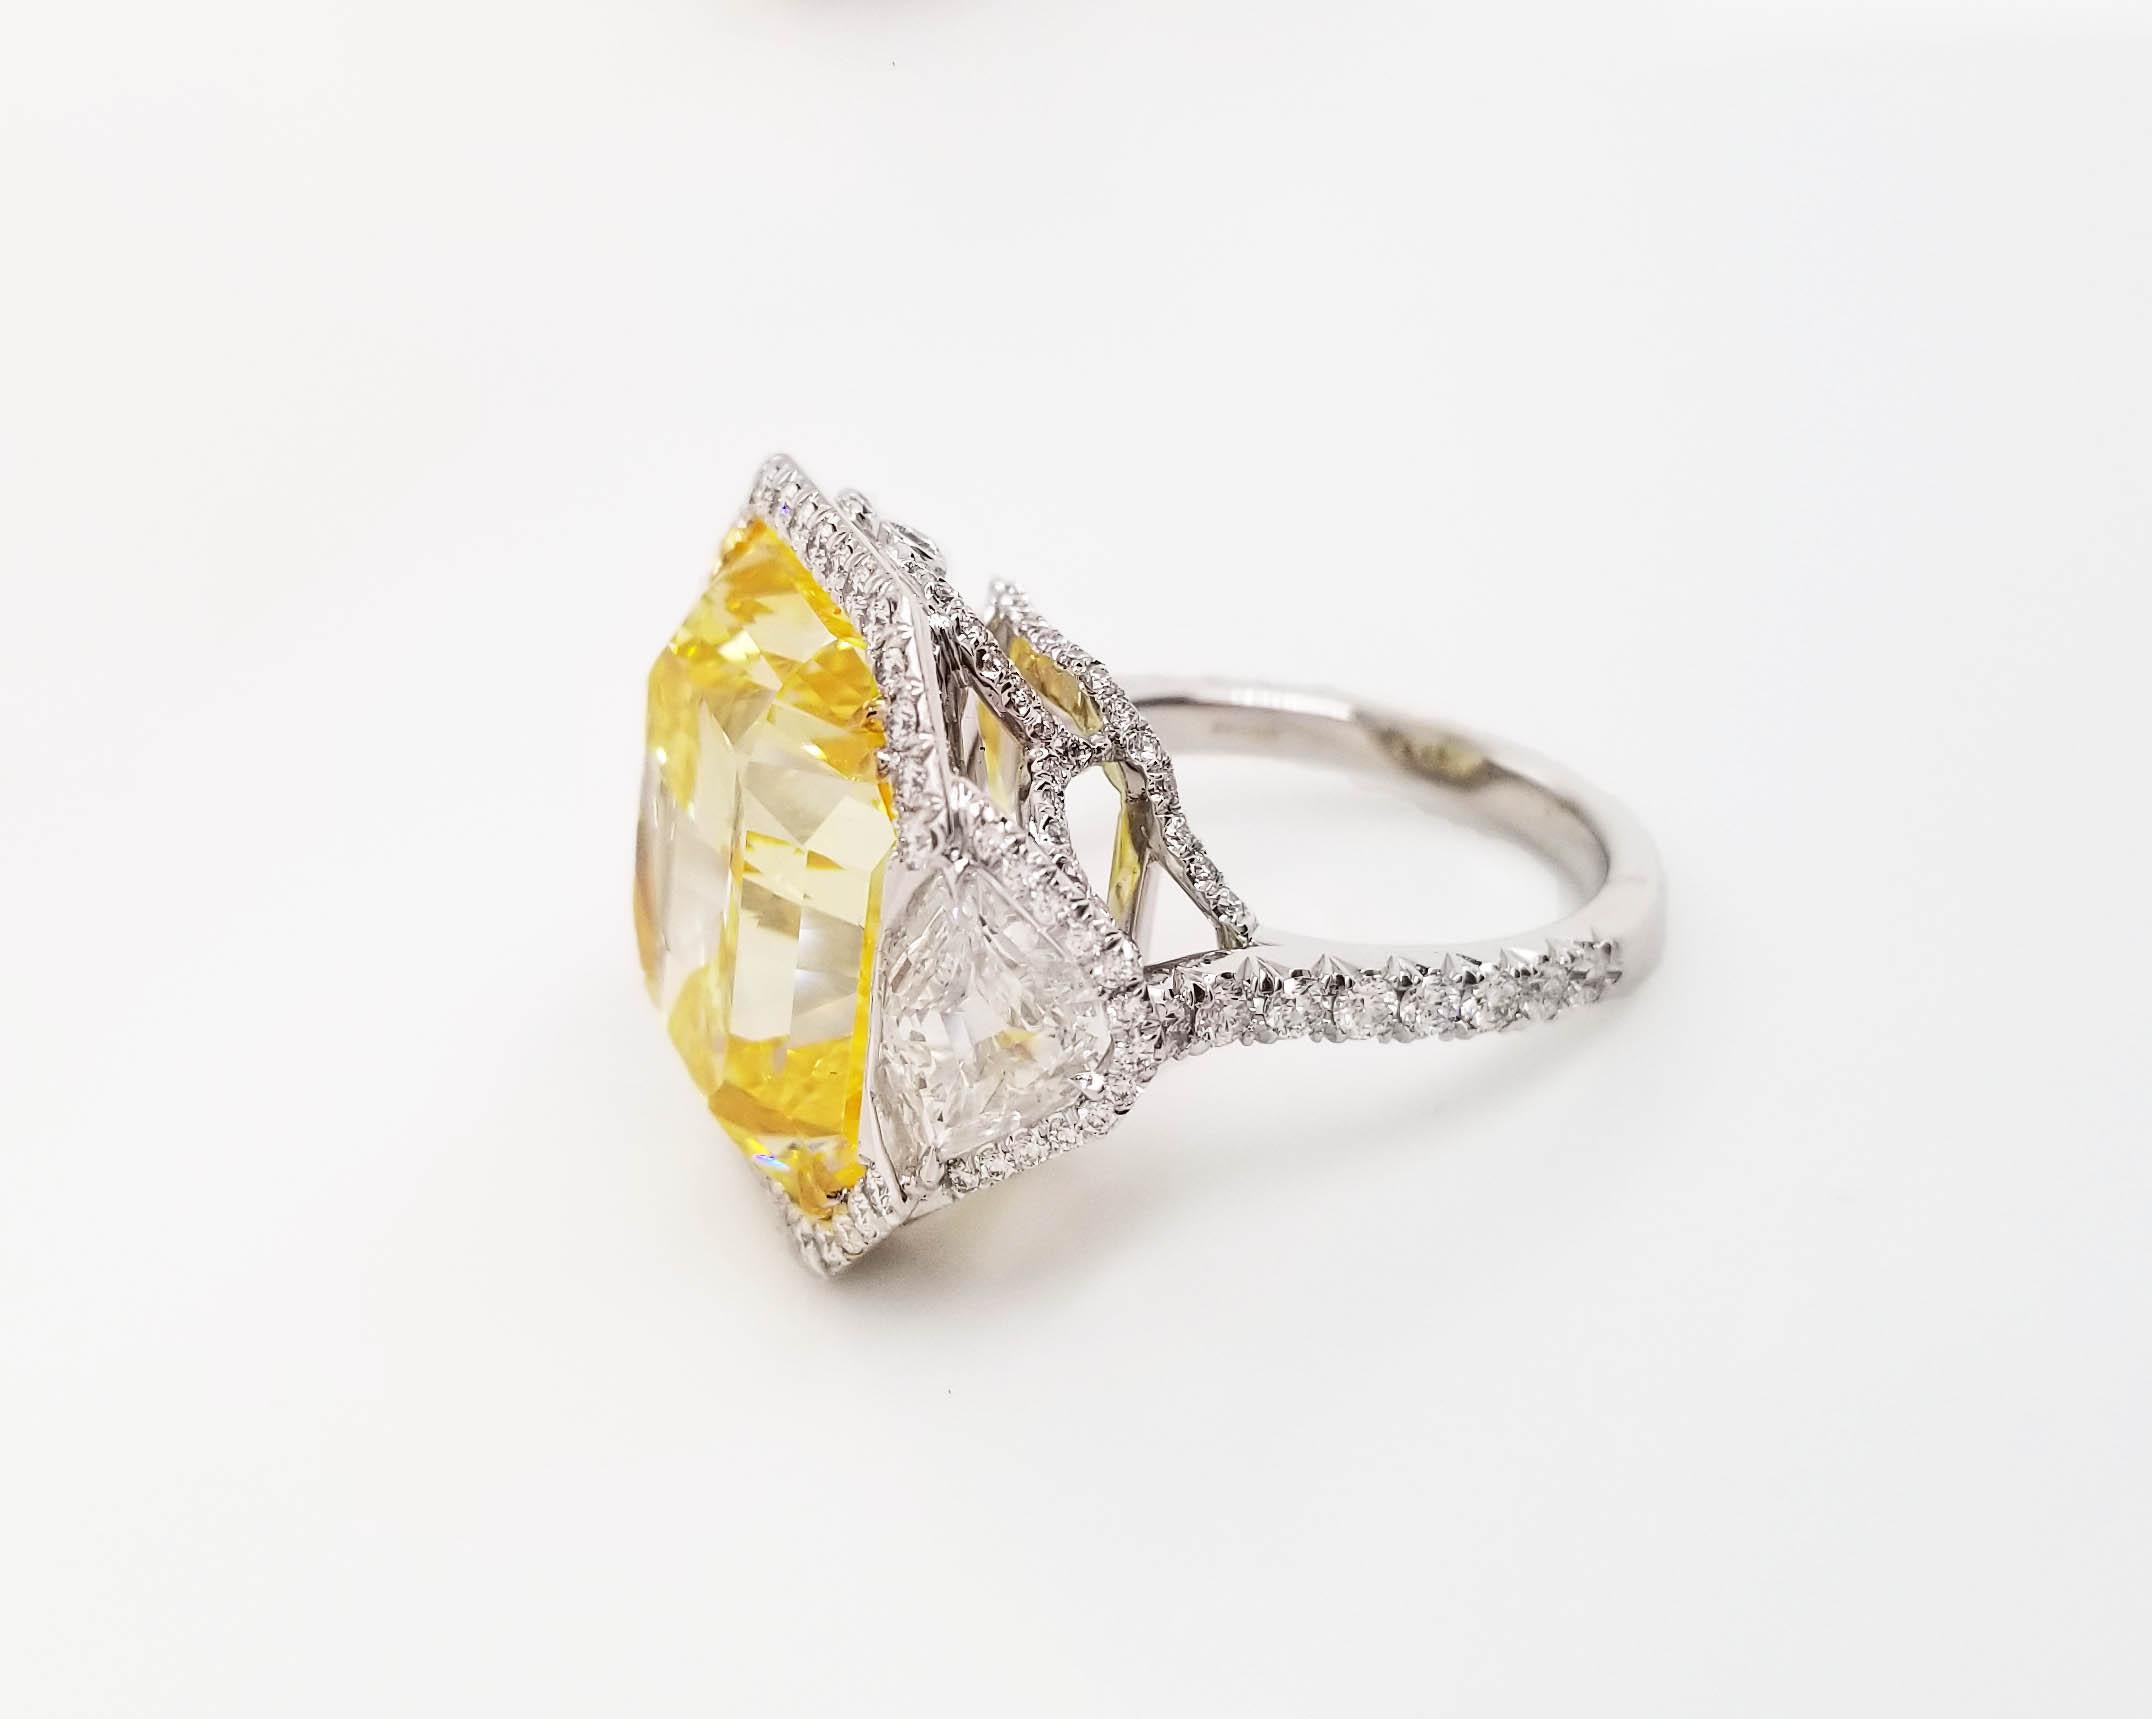 This astonishes classic ring From Scarselli features a 20-carat Fancy Vivid Yellow Radiant Cut Diamond with GIA certificate (see certificate picture for detailed stone information). The center diamond is surrounded by 1.10 carat of brilliant-cut